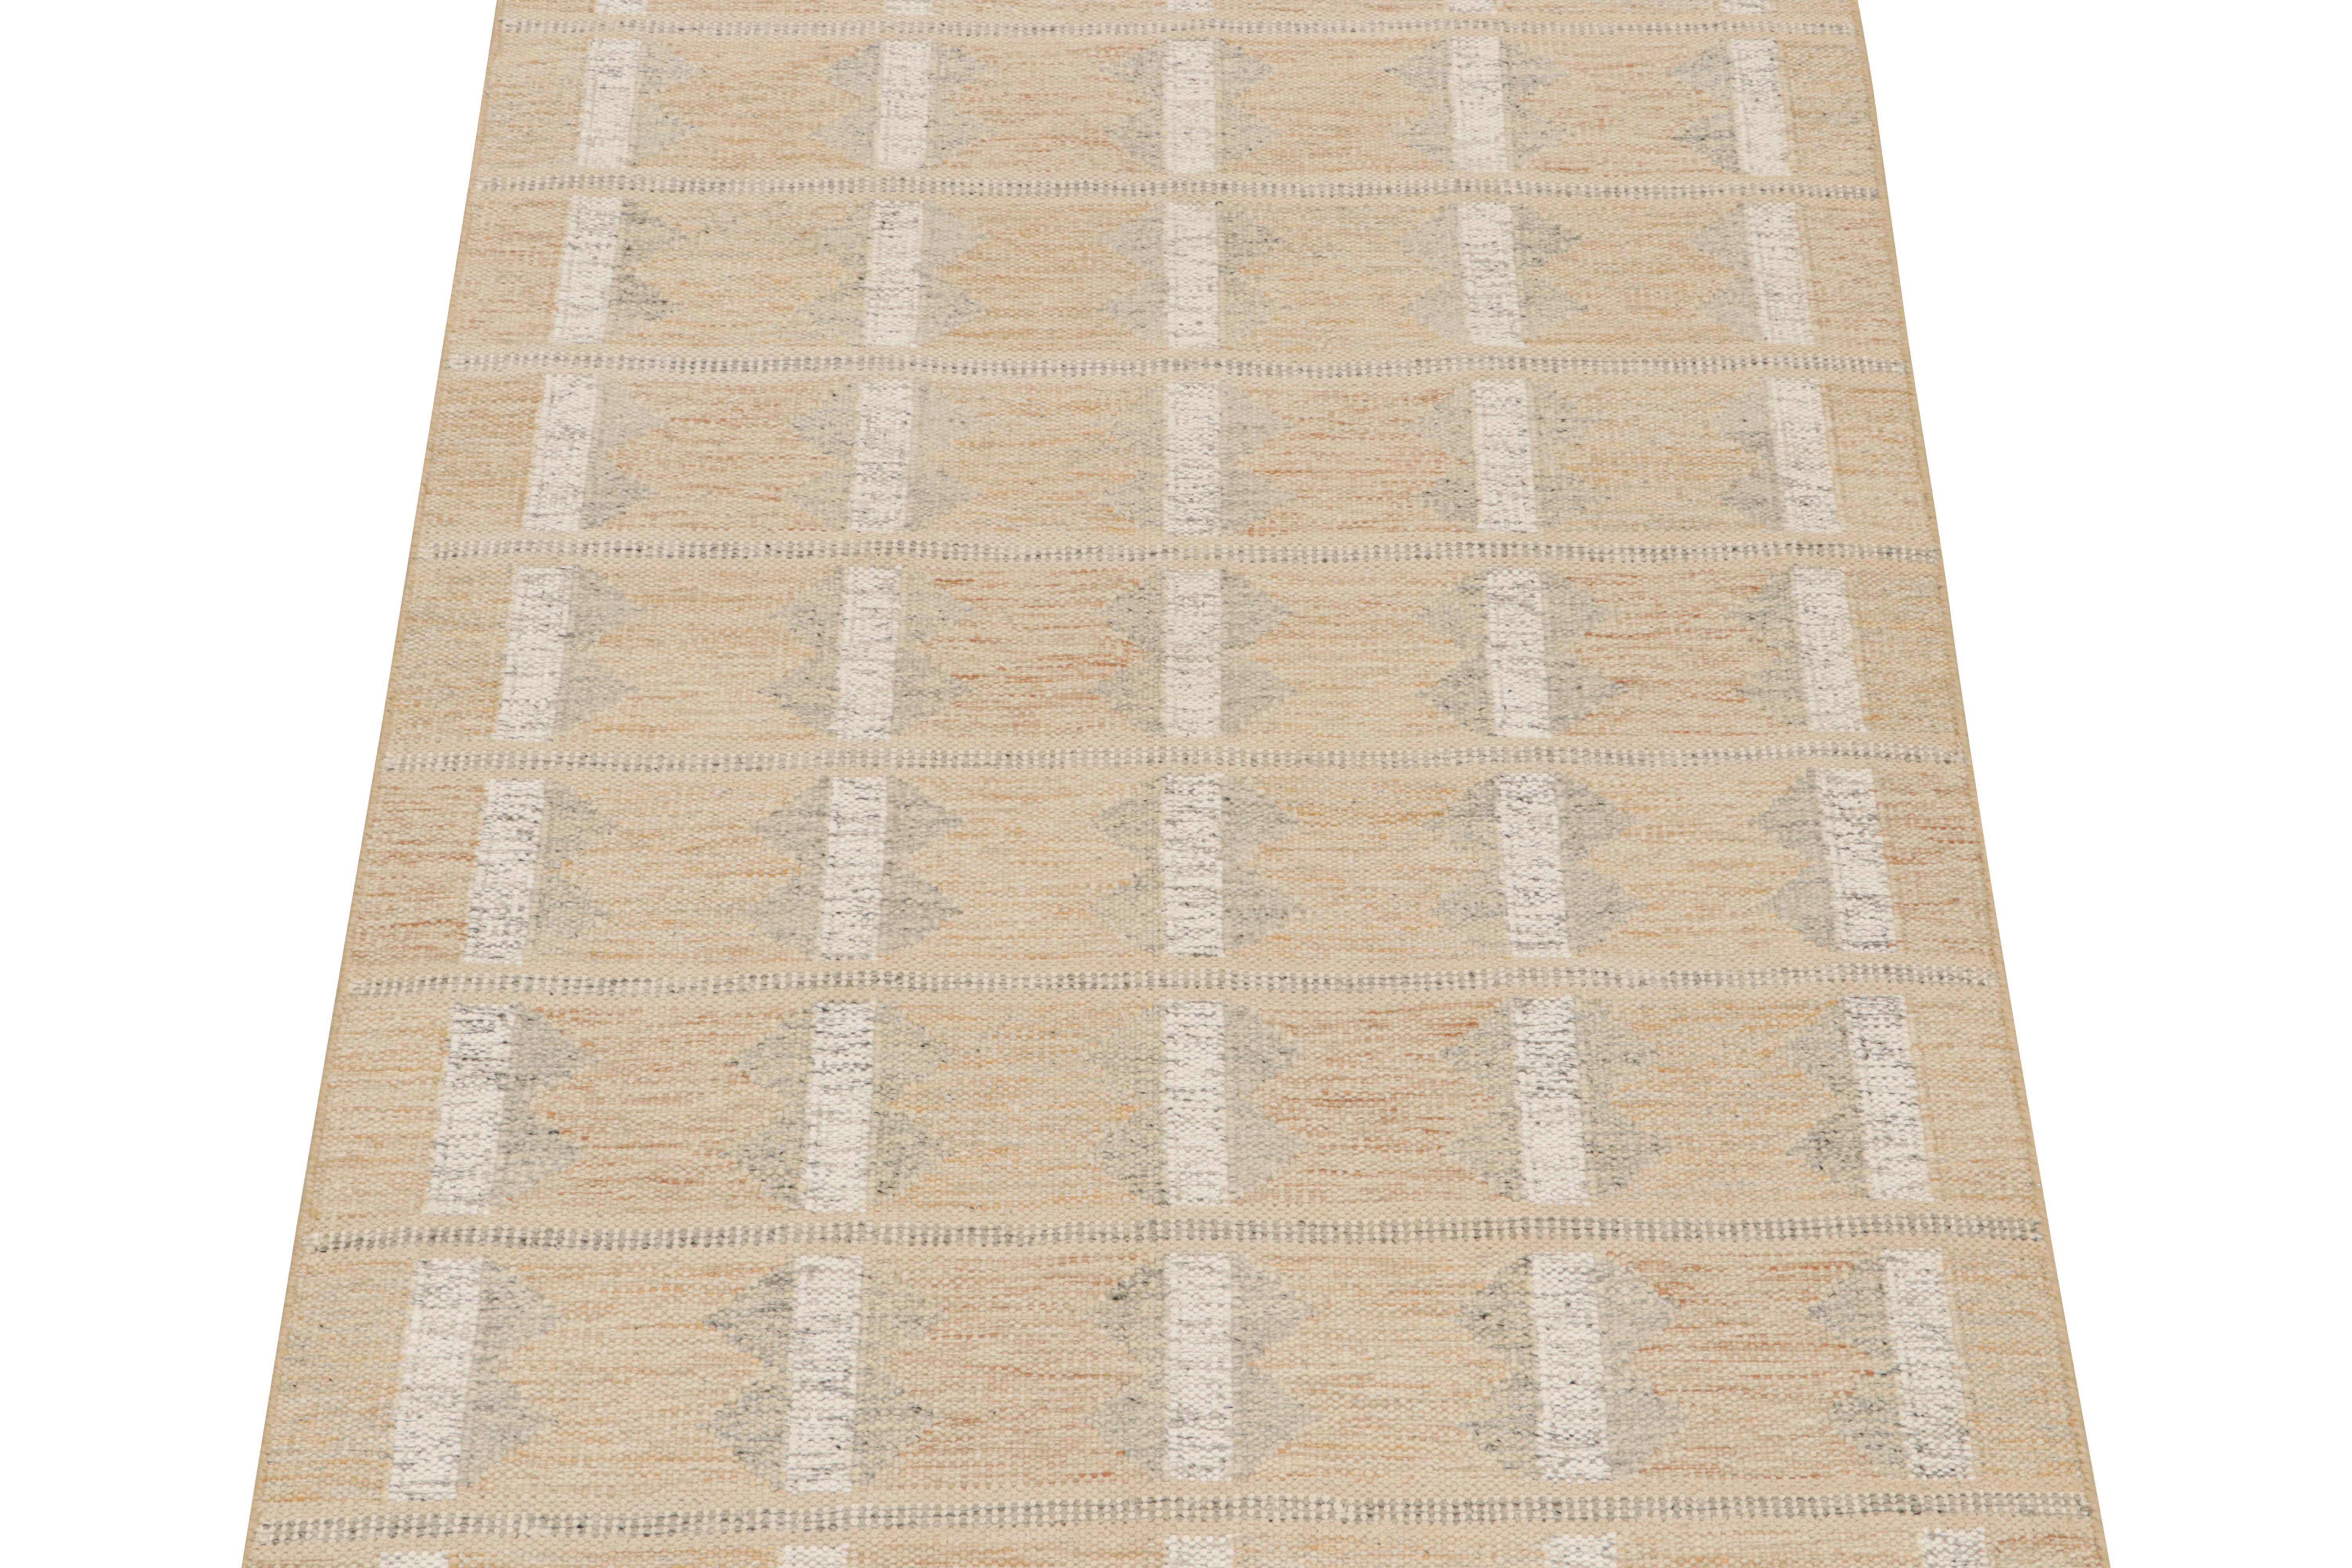 This 5x7 flat weave is a new addition to the Scandinavian Kilim collection by Rug & Kilim. Handwoven in wool and natural yarns, its design reflects a contemporary take on midcentury Rollakans and Swedish Deco style.

On the Design:

This new